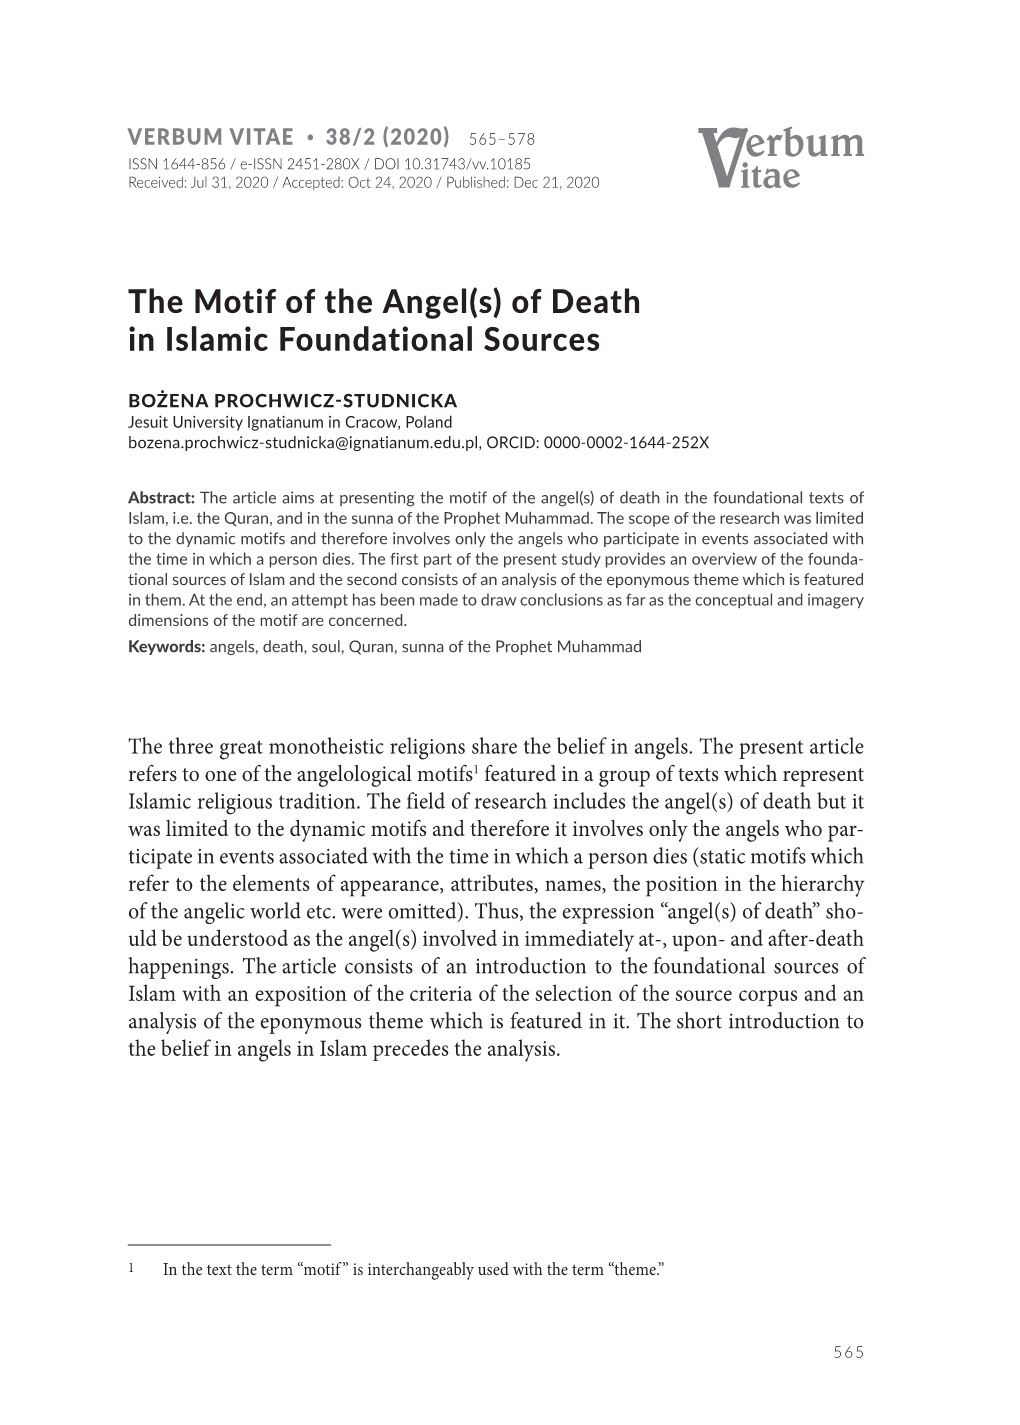 The Motif of the Angel(S) of Death in Islamic Foundational Sources